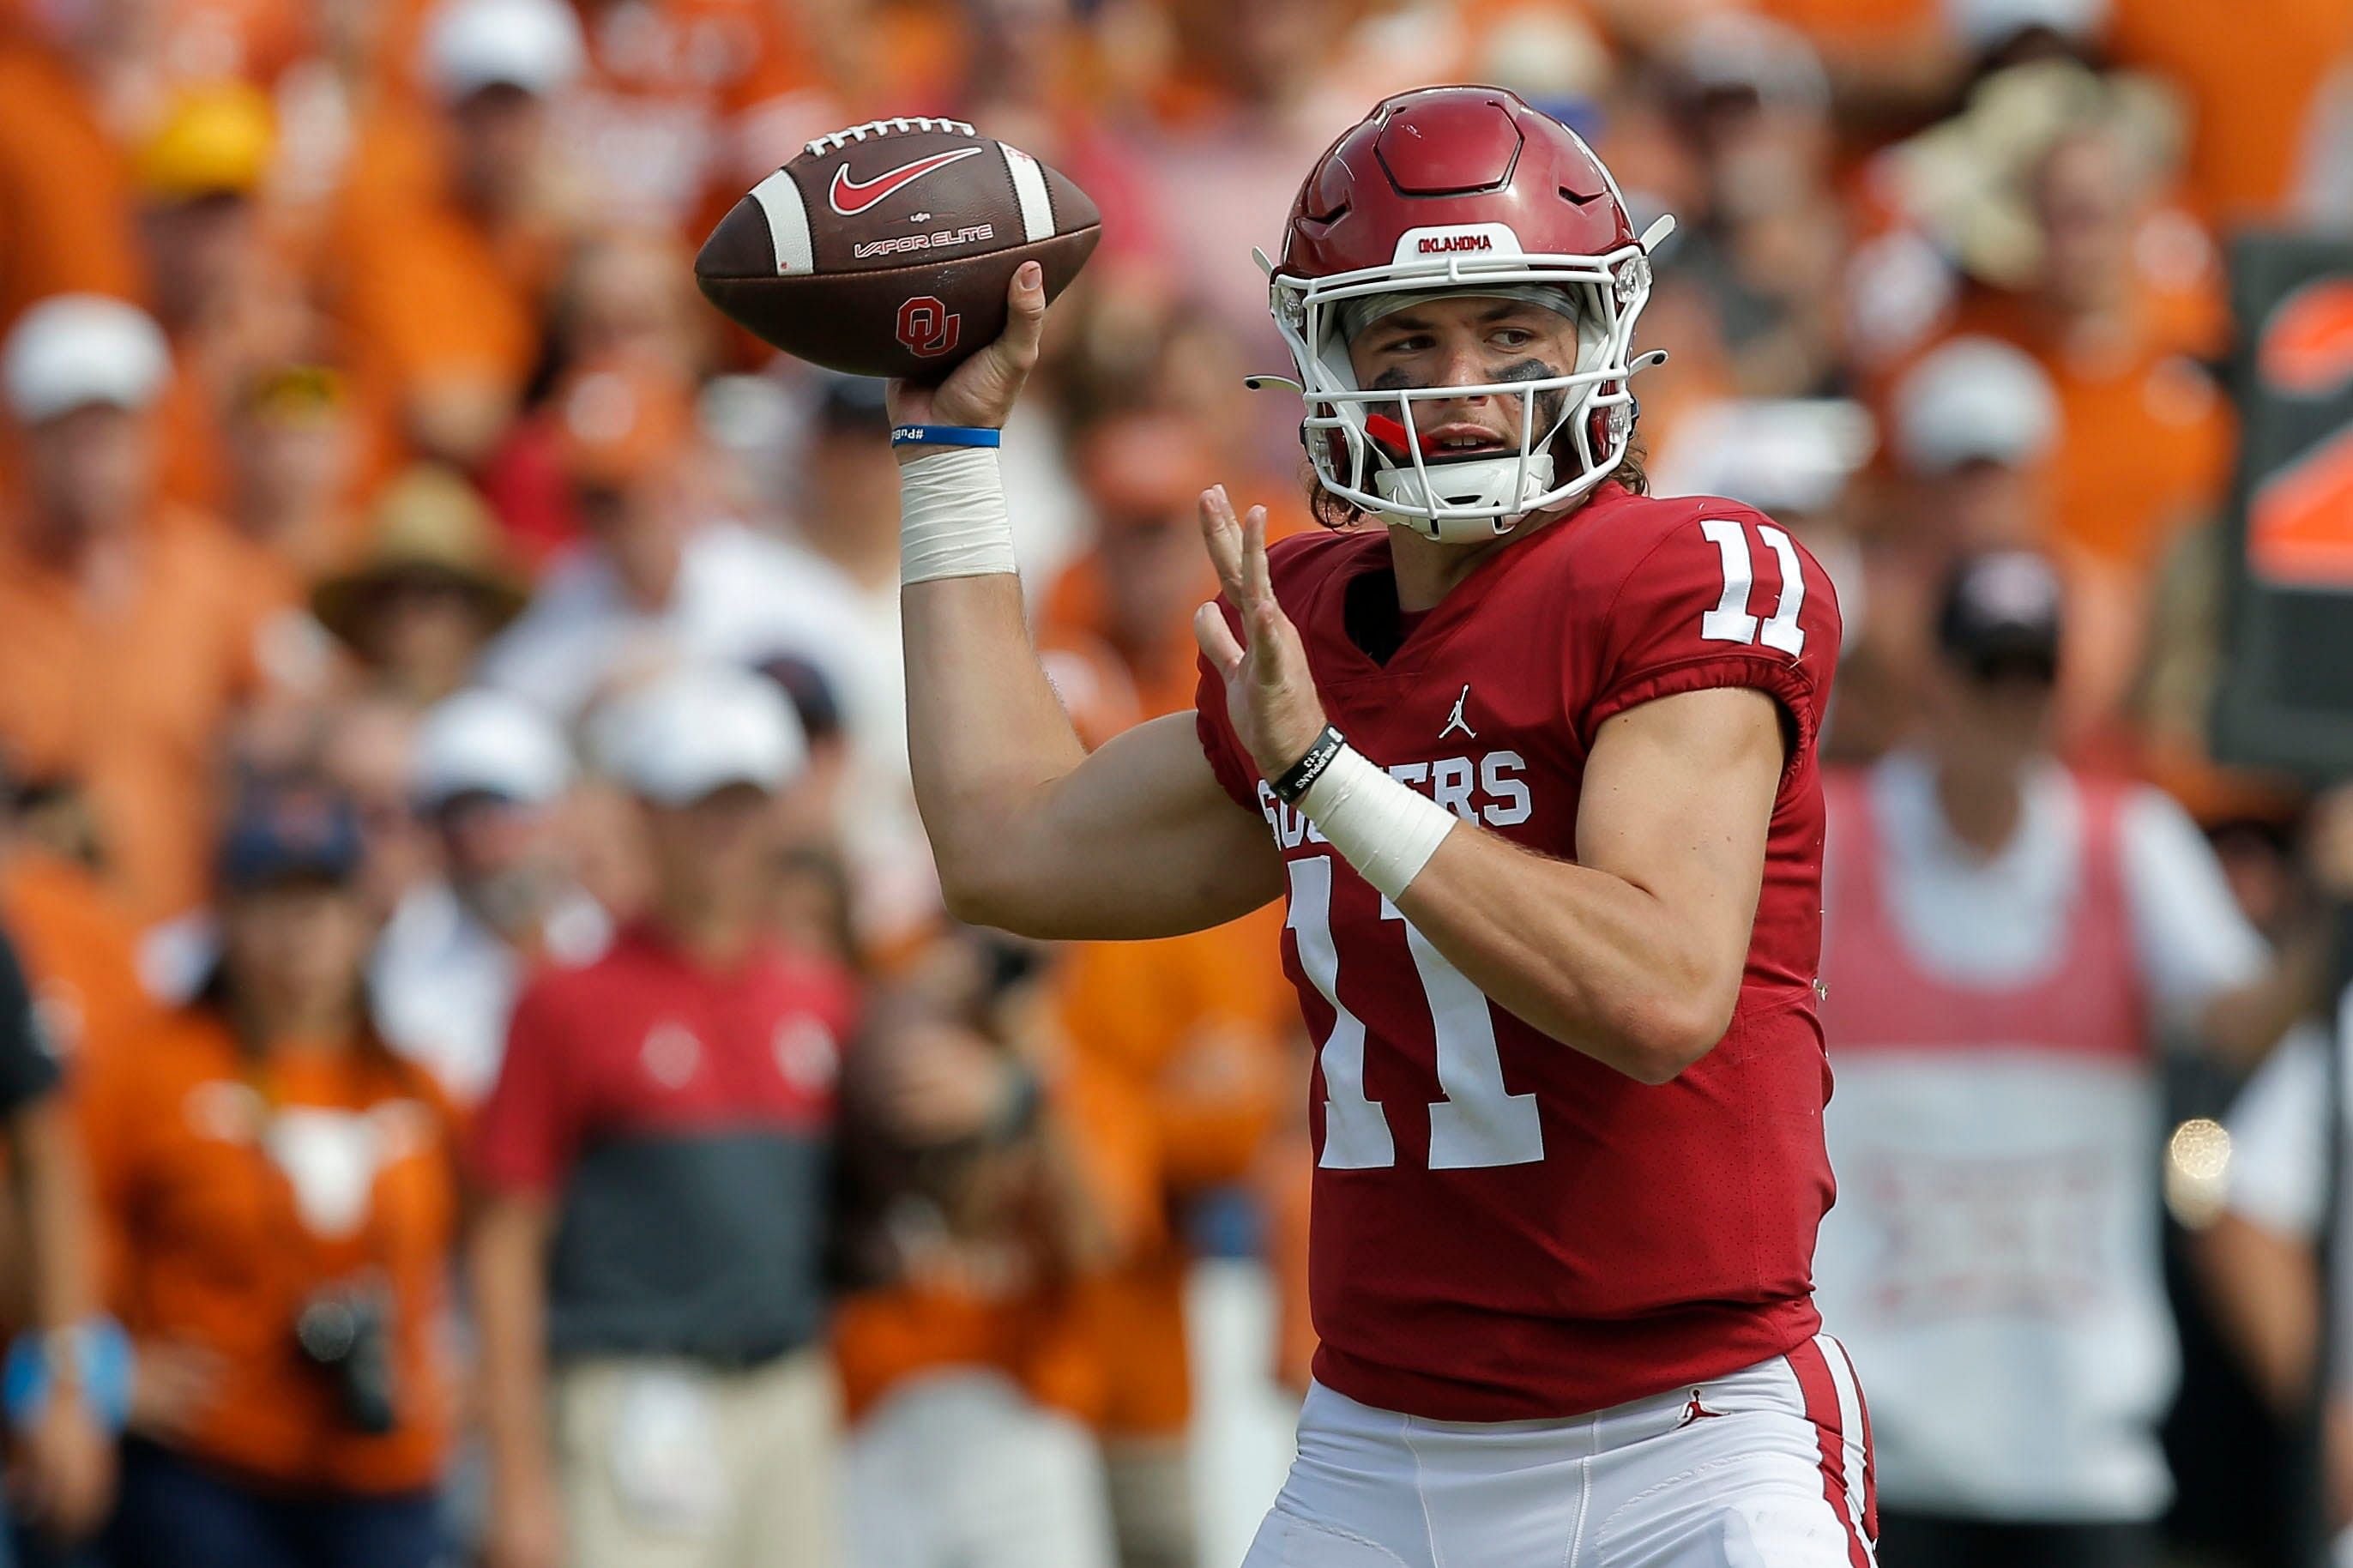 Syndication: The Oklahoman: Oklahoma Sooners quarterback Davis Beville during the Red River Showdown between Oklahoma and Texas at the Cotton Bowl in Dallas on Oct. 8, 2022. Texas won 49-0.